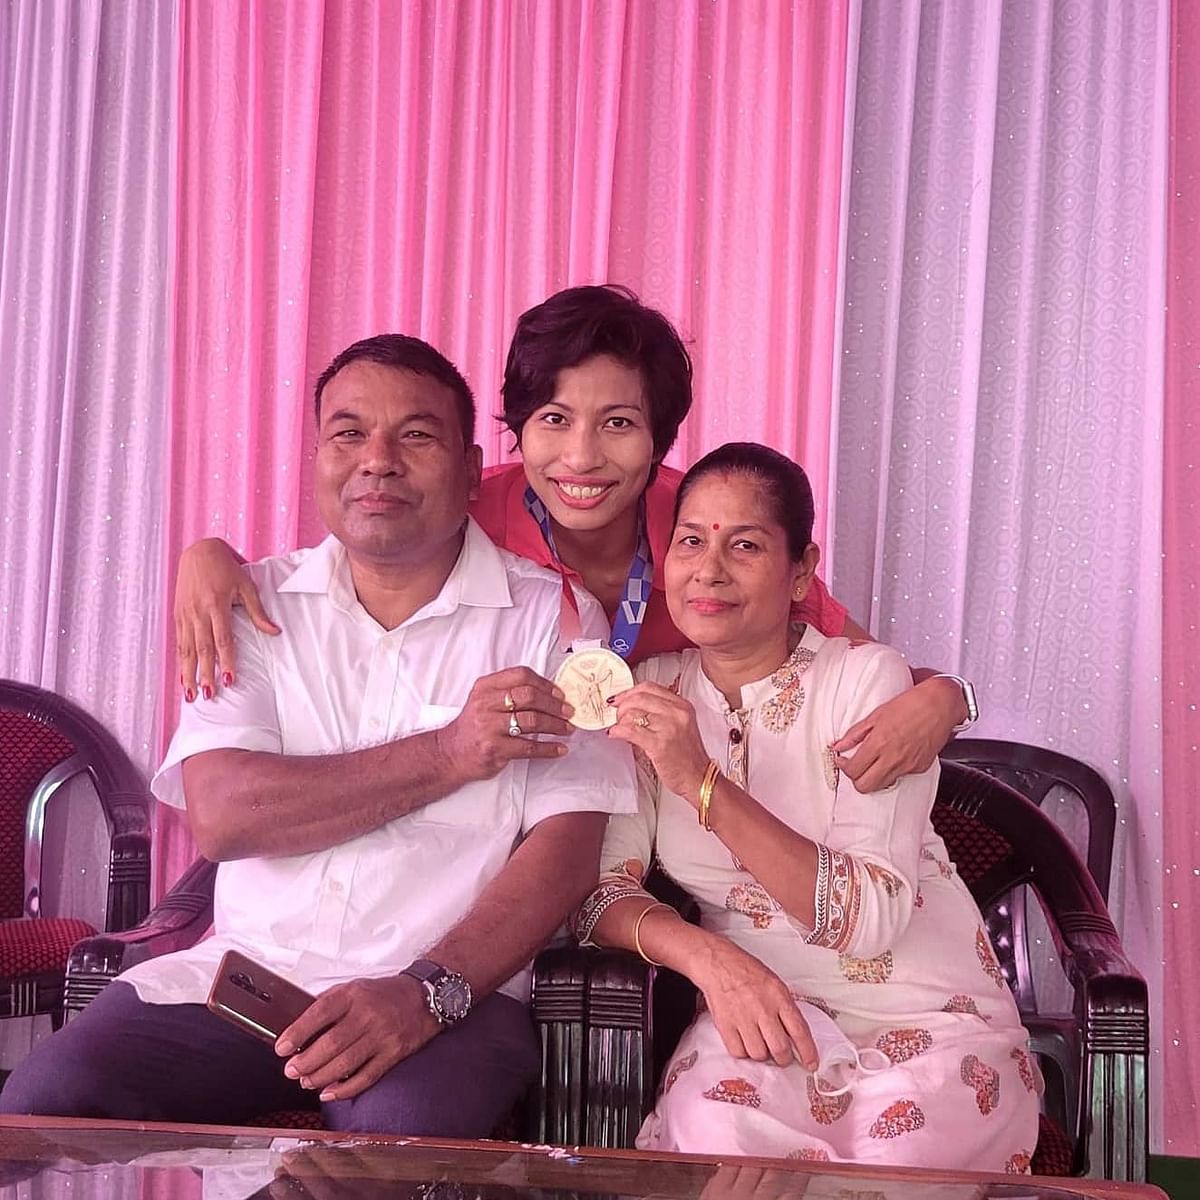 Lovlina Borgohain from Assam's Golaghat is the reigning World Boxing Champion and an Olympic bronze medalist. 